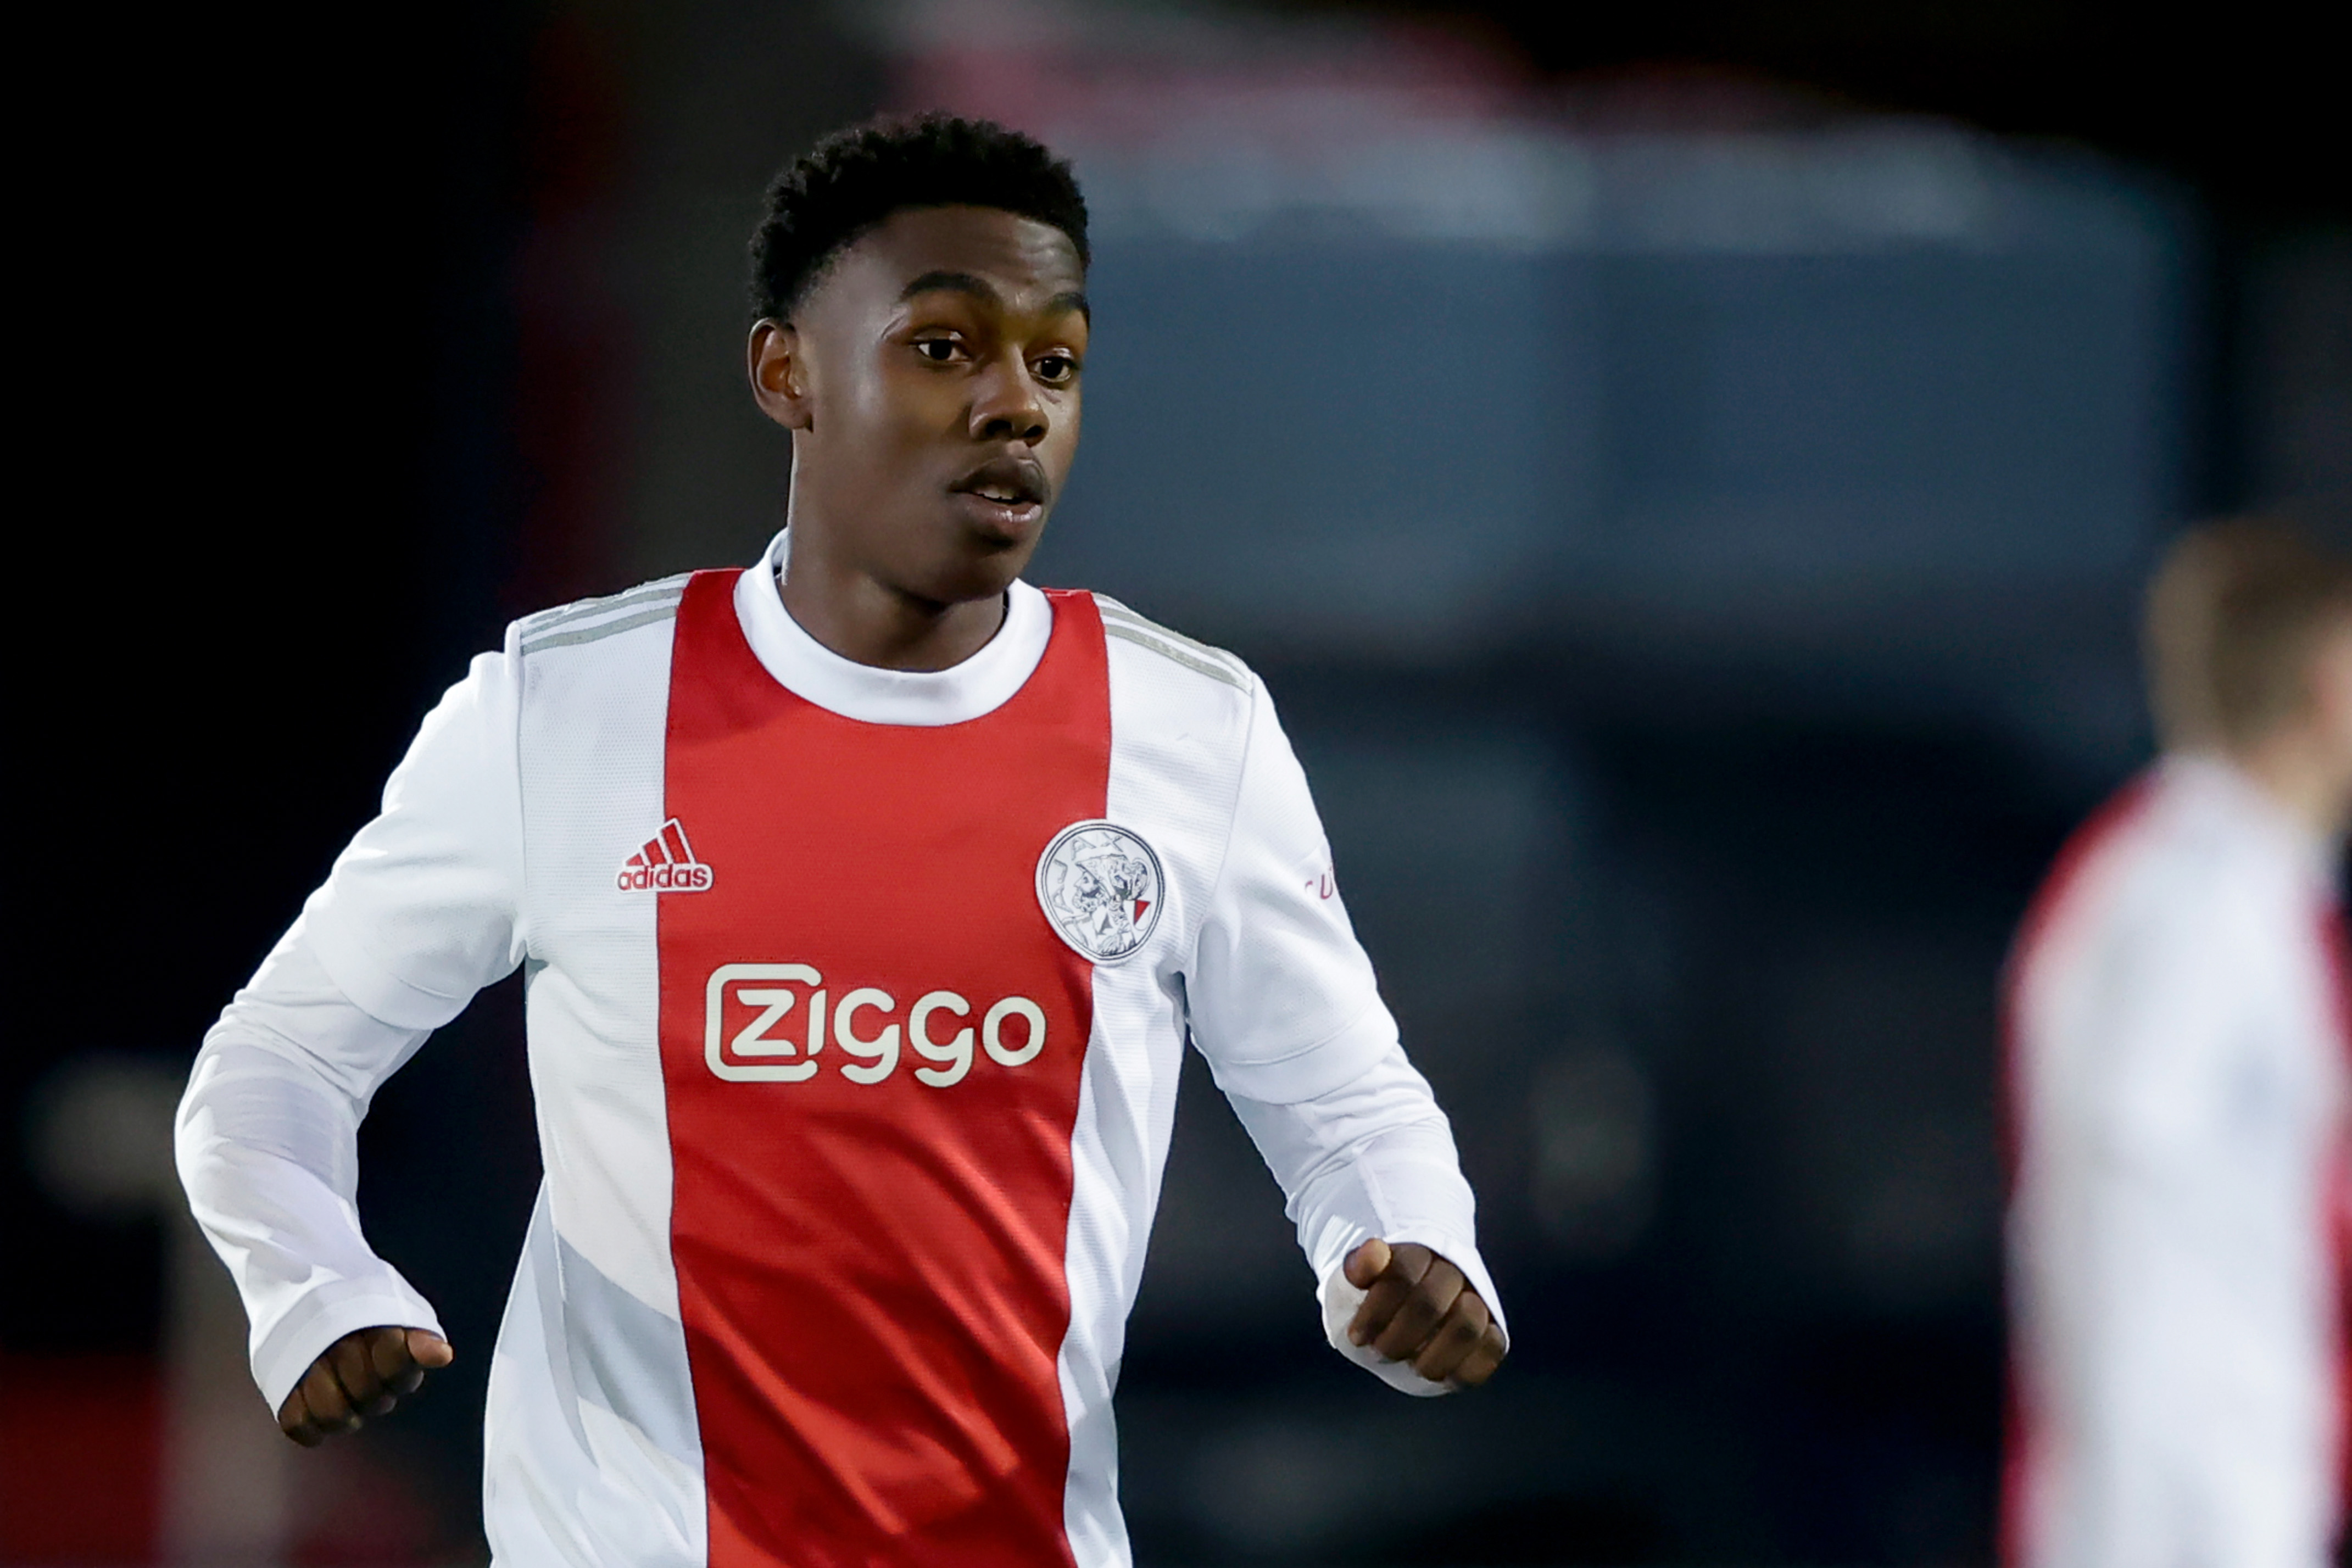 Ajax interested in bringing Noa Lang back to the club